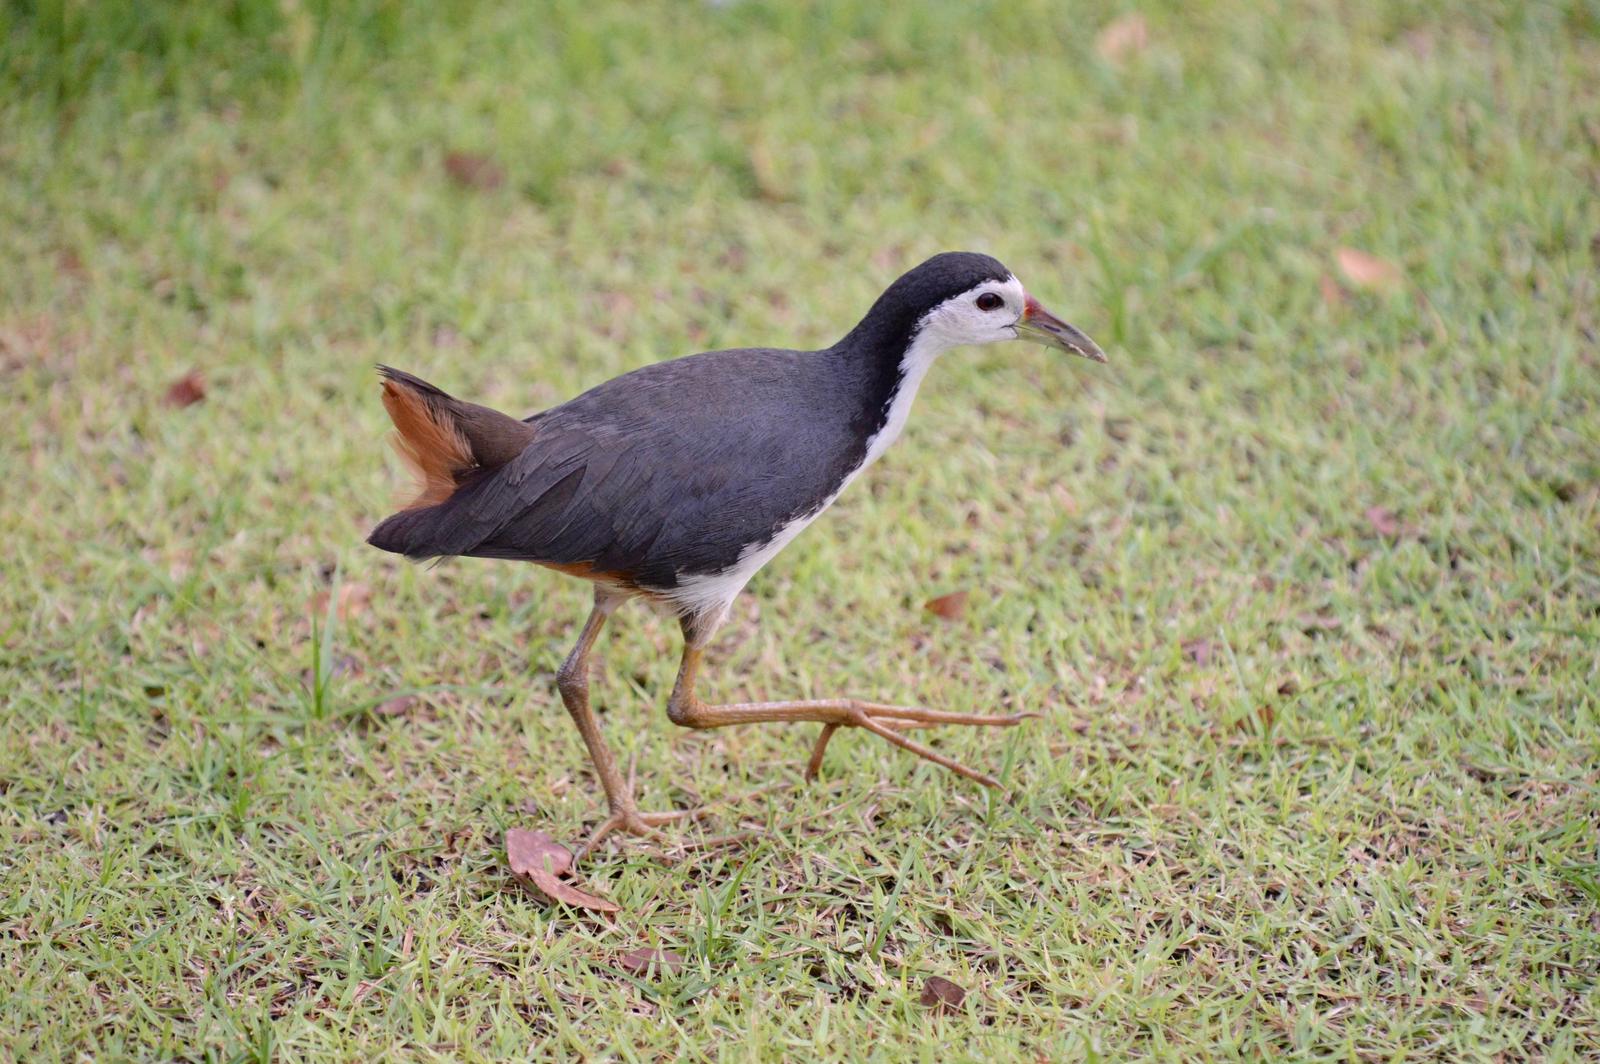 White-breasted Waterhen Photo by marcel finlay